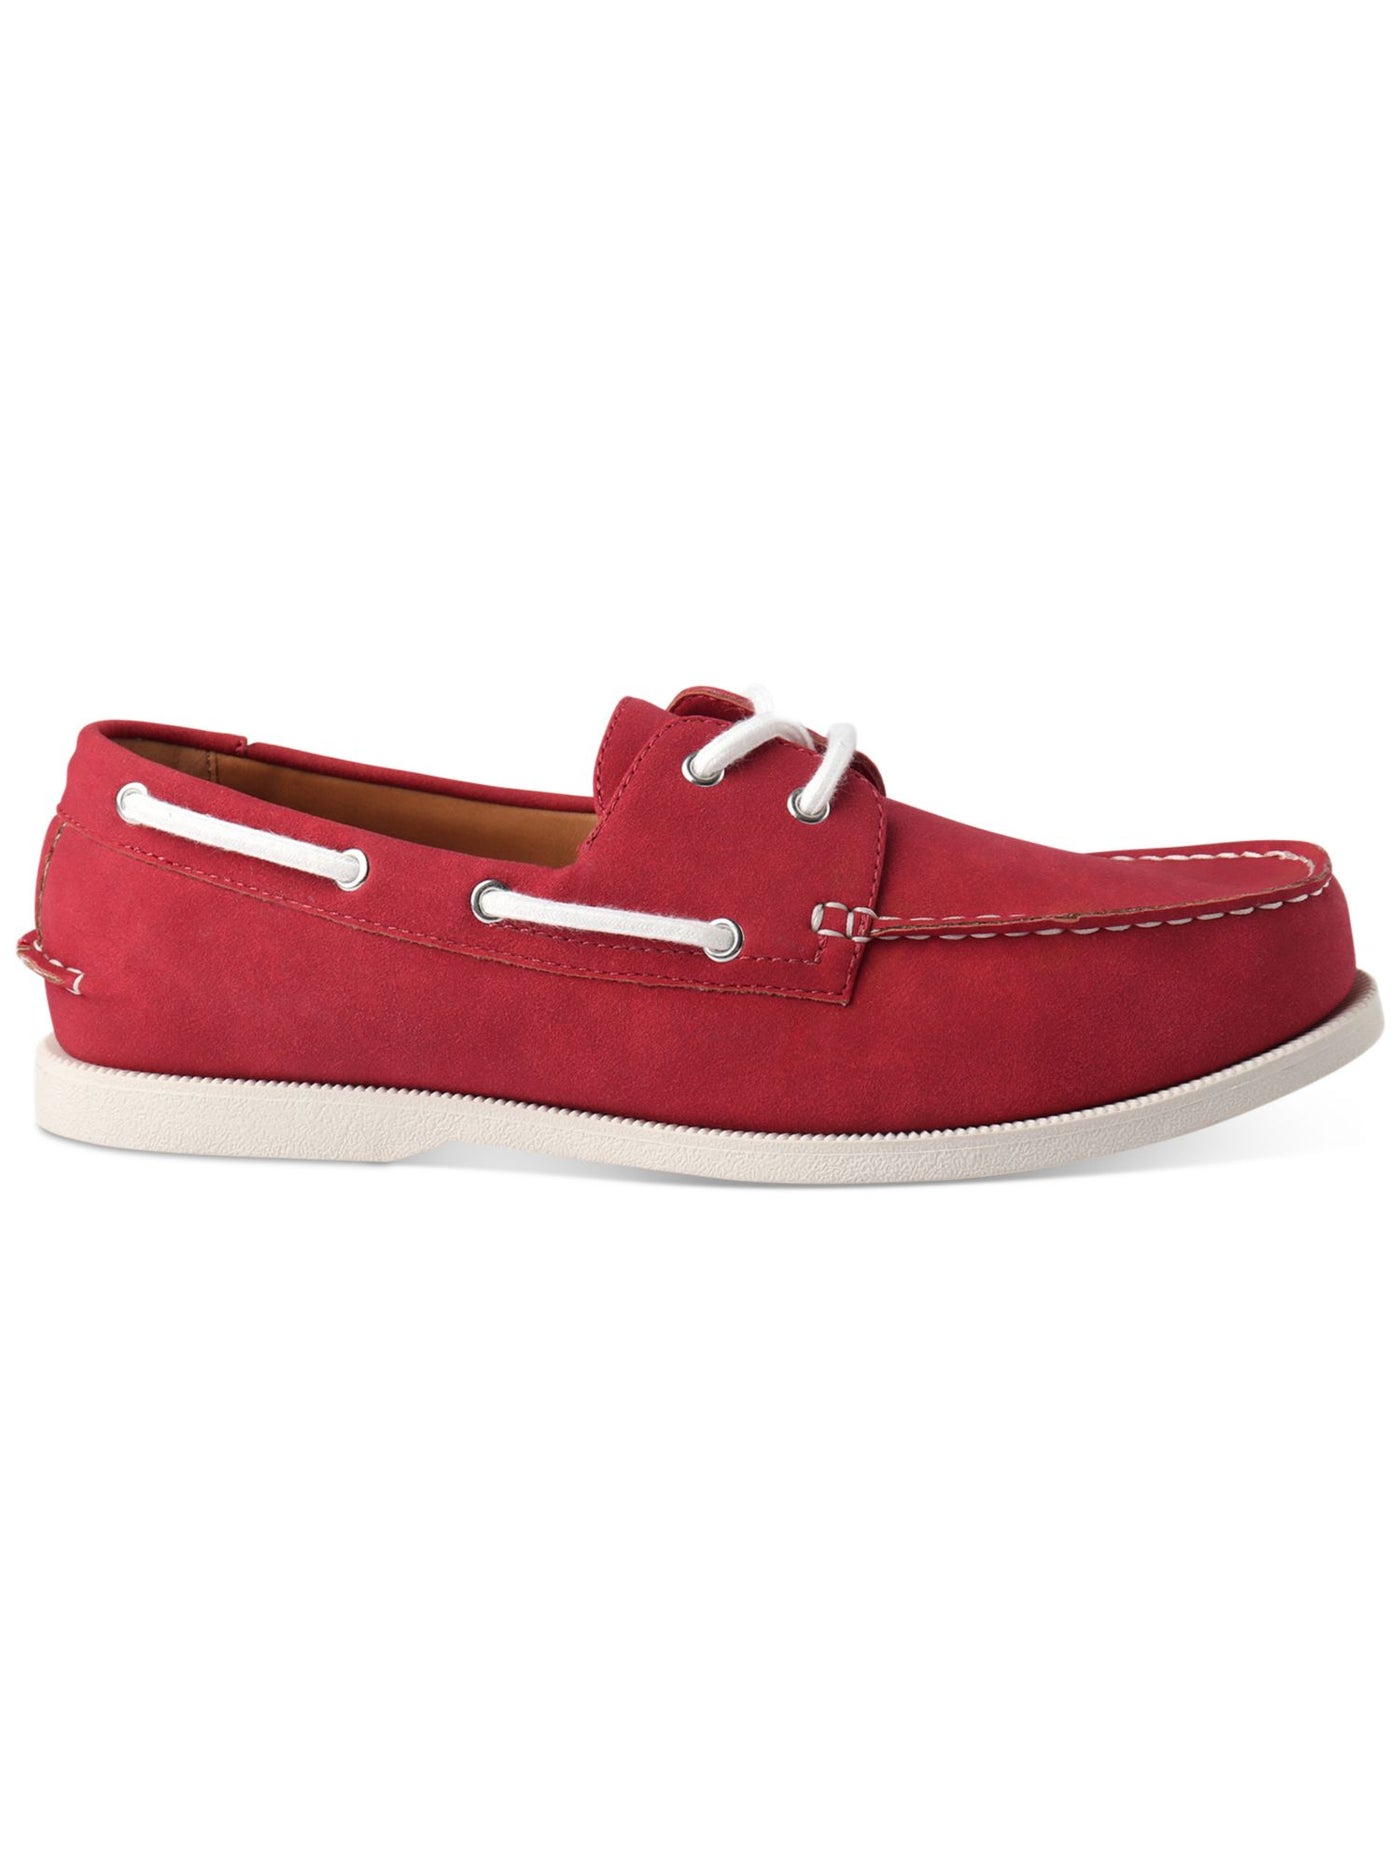 CLUBROOM Mens Red Comfort Elliot Round Toe Lace-Up Boat Shoes 13 M